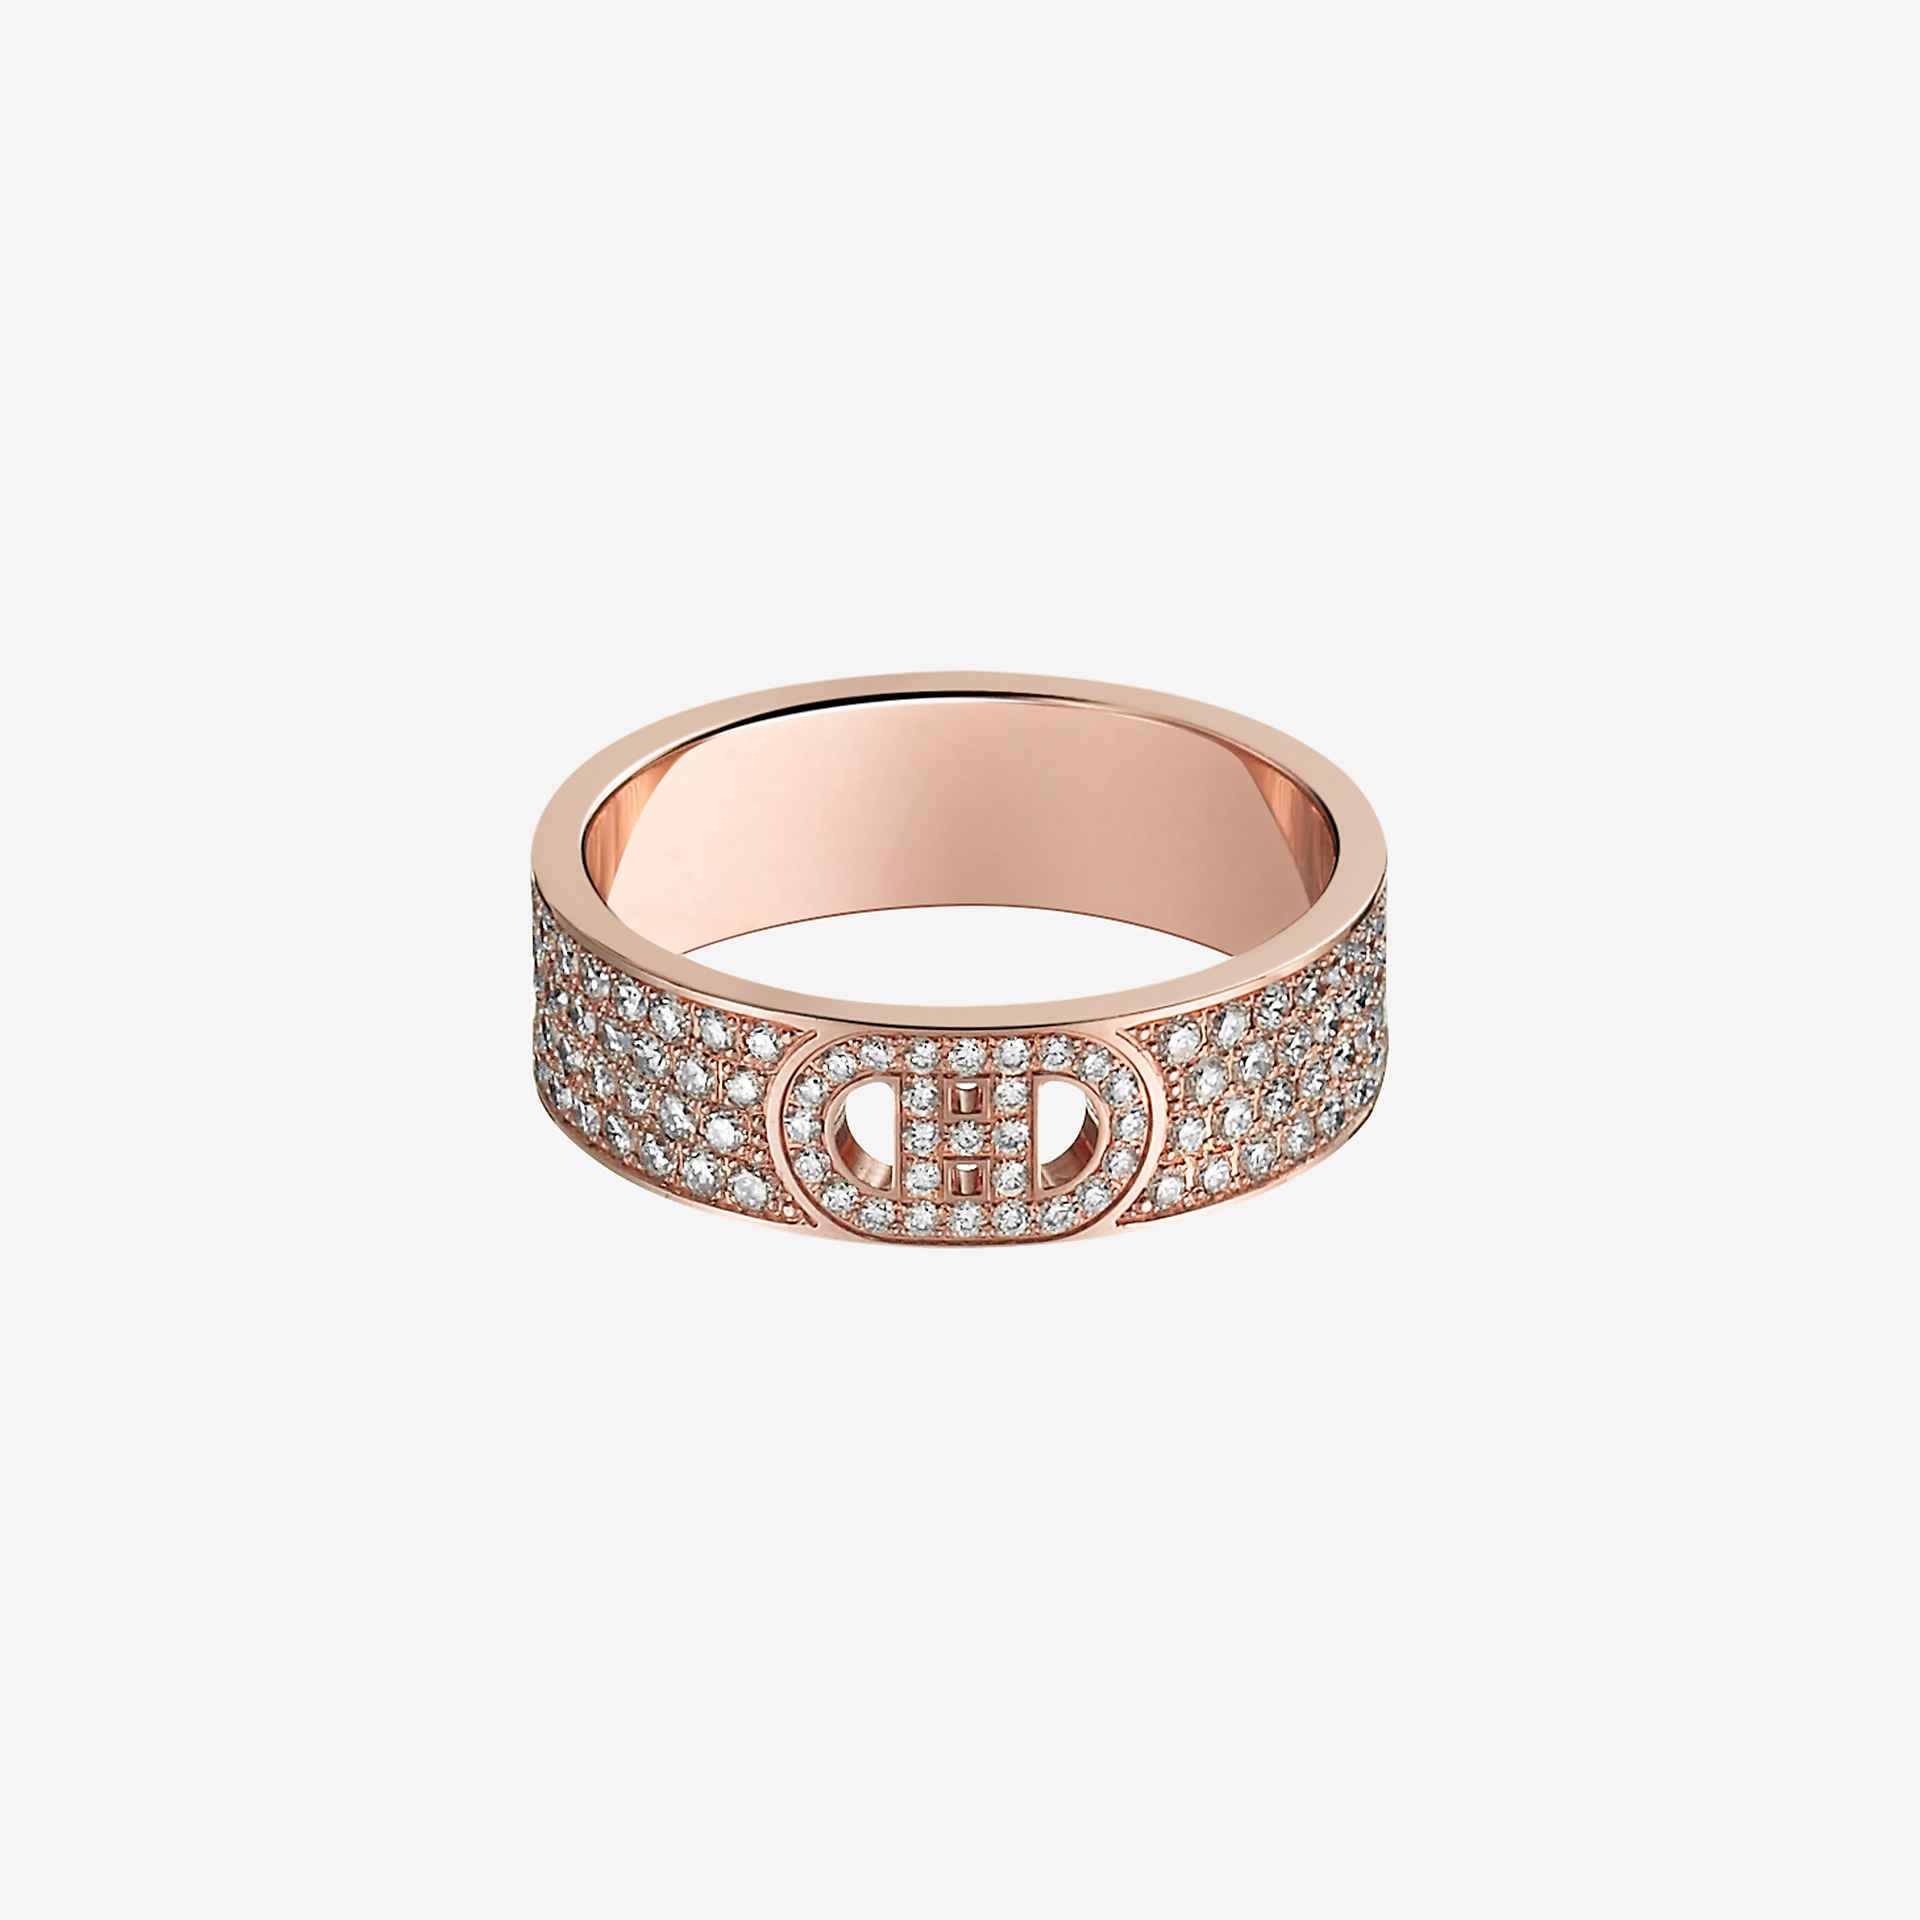 H d'Ancre ring, small model